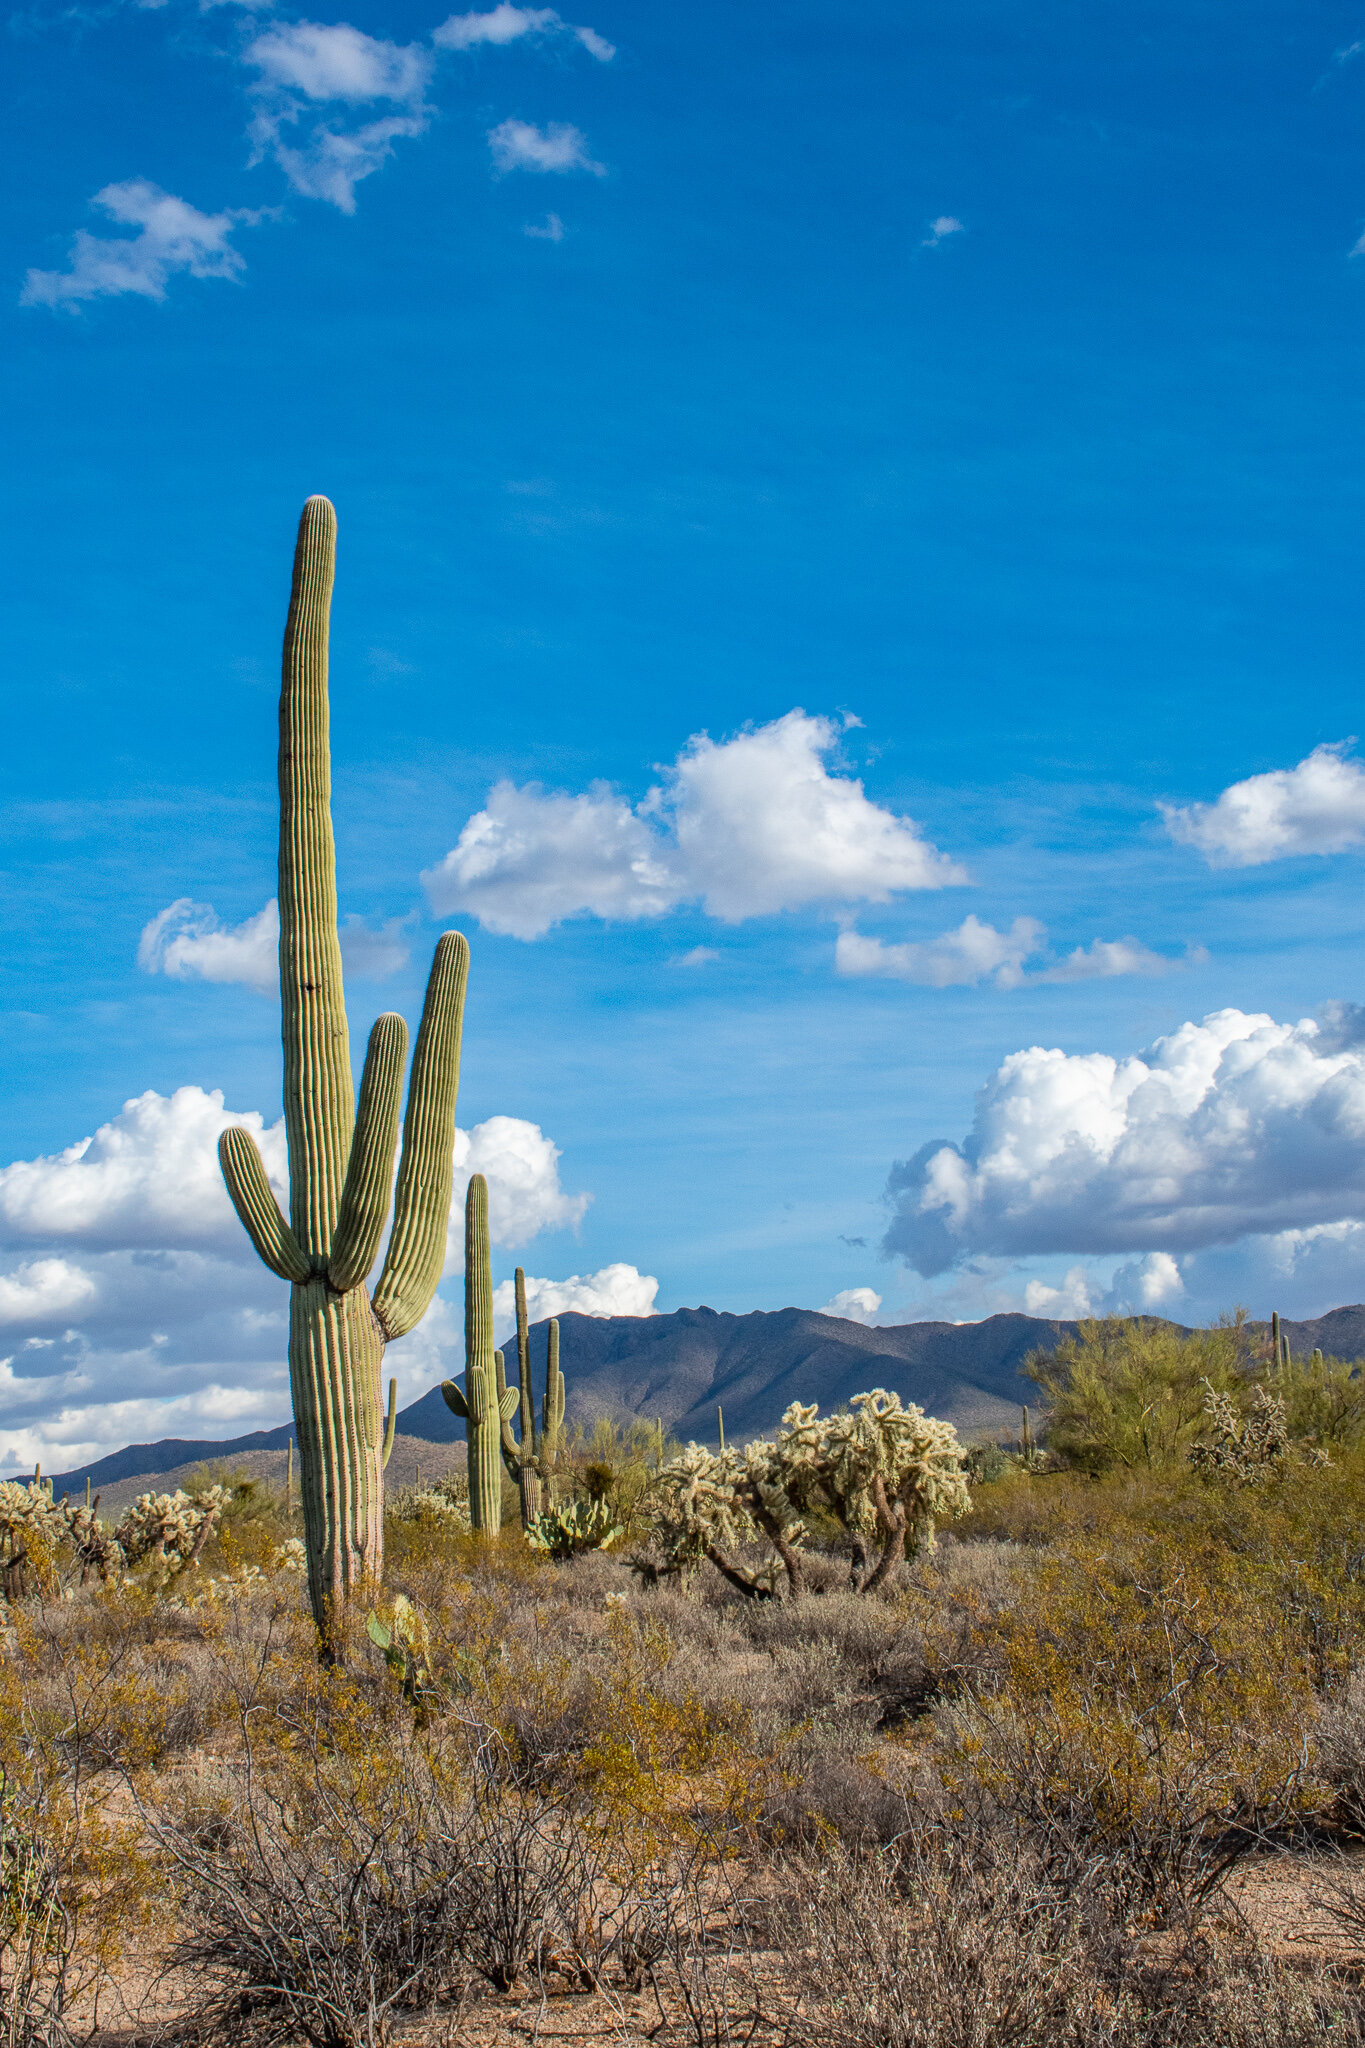 Tucson, AZ | All the places to see and things to do — Celebrate & Explore